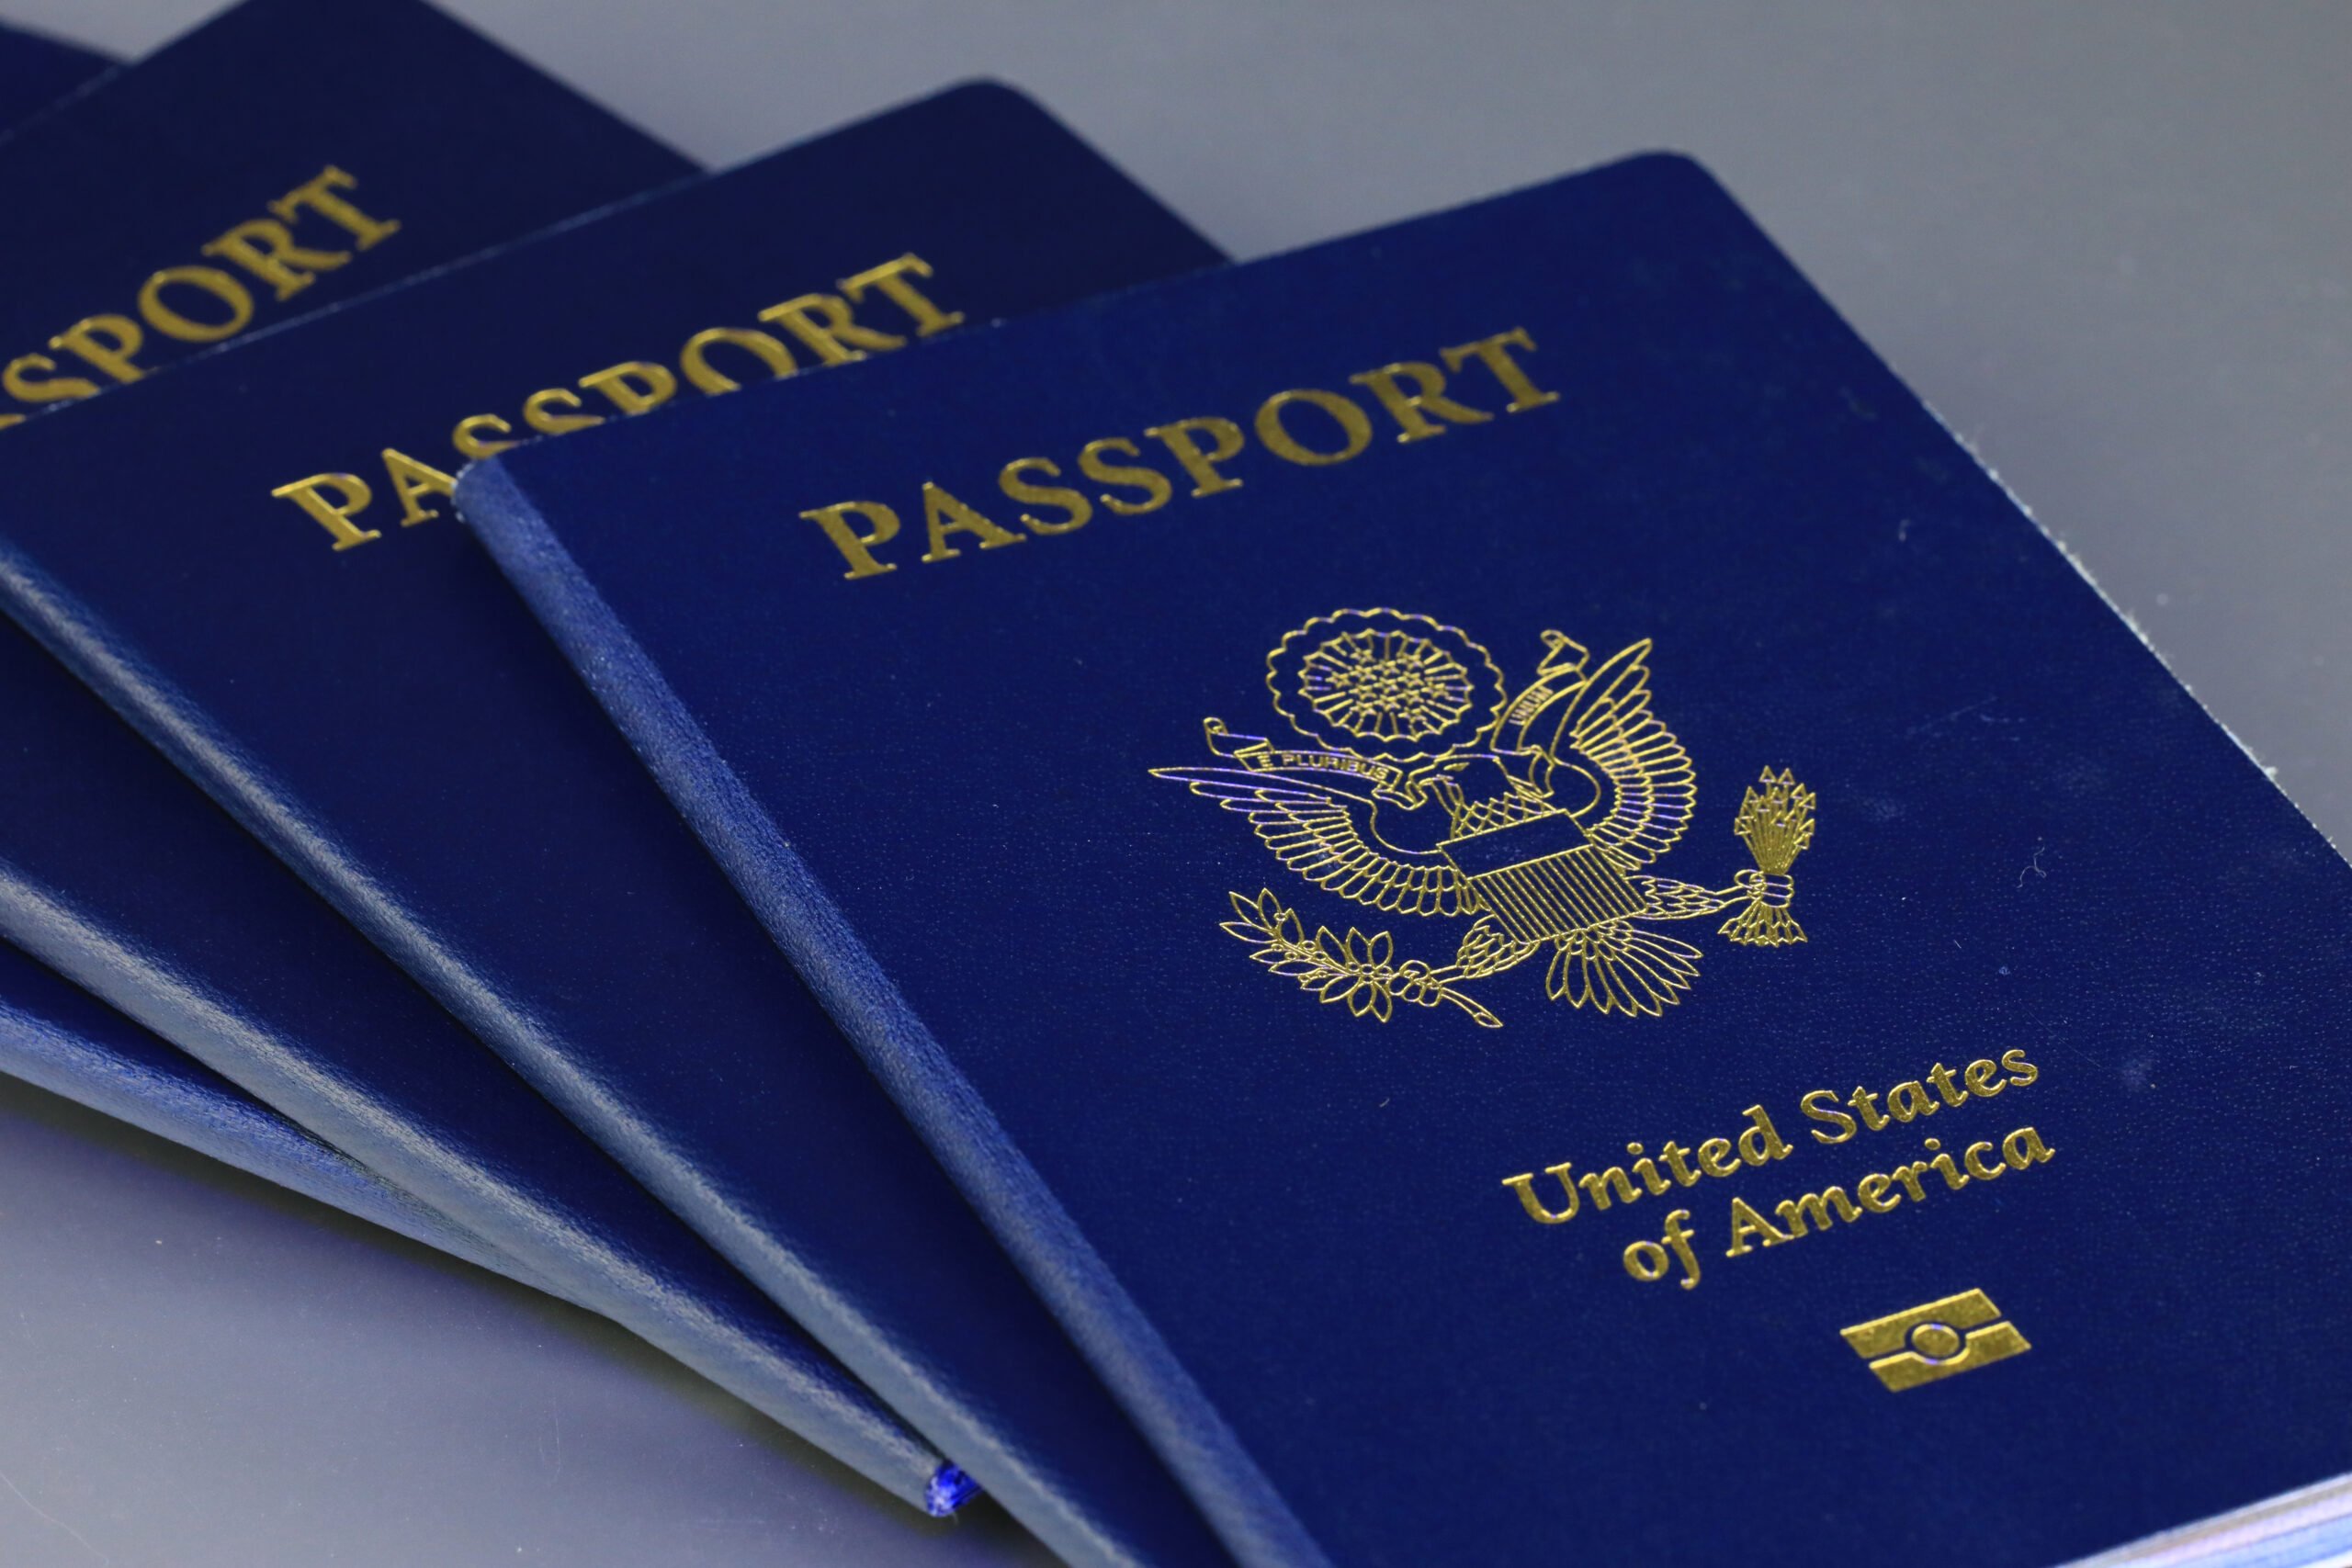 Leaving SF for a Vacation Abroad? Here’s How to Navigate the Overwhelmed Passport Bureaucracy